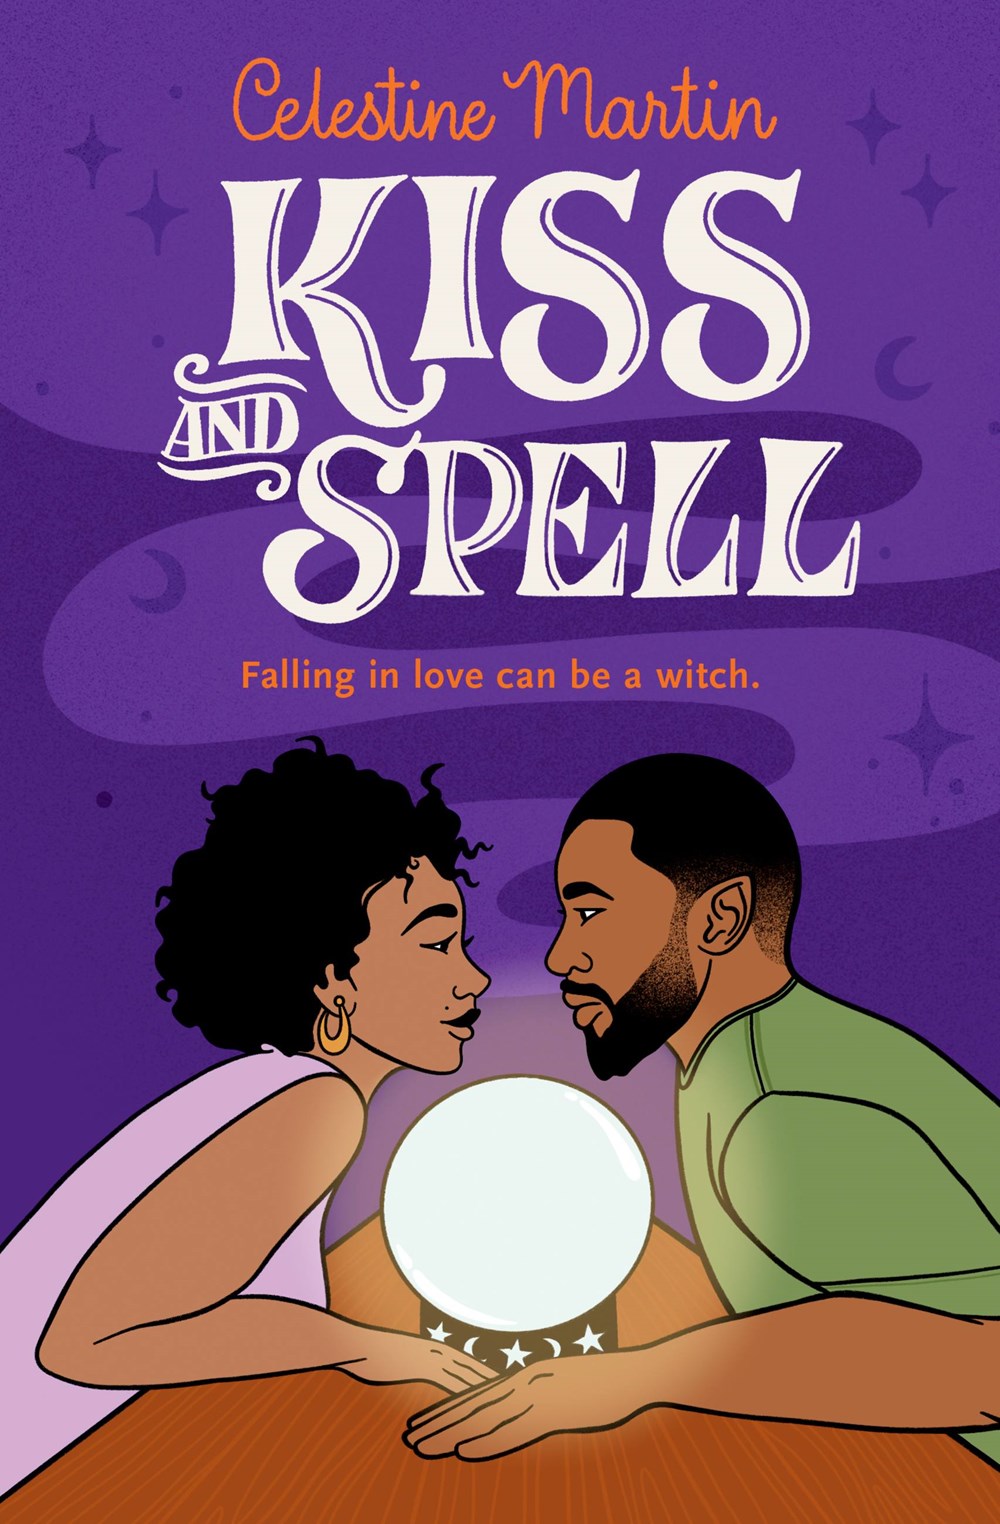 Kiss and Spell by Celestine Martin (Paperback) (PREORDER)